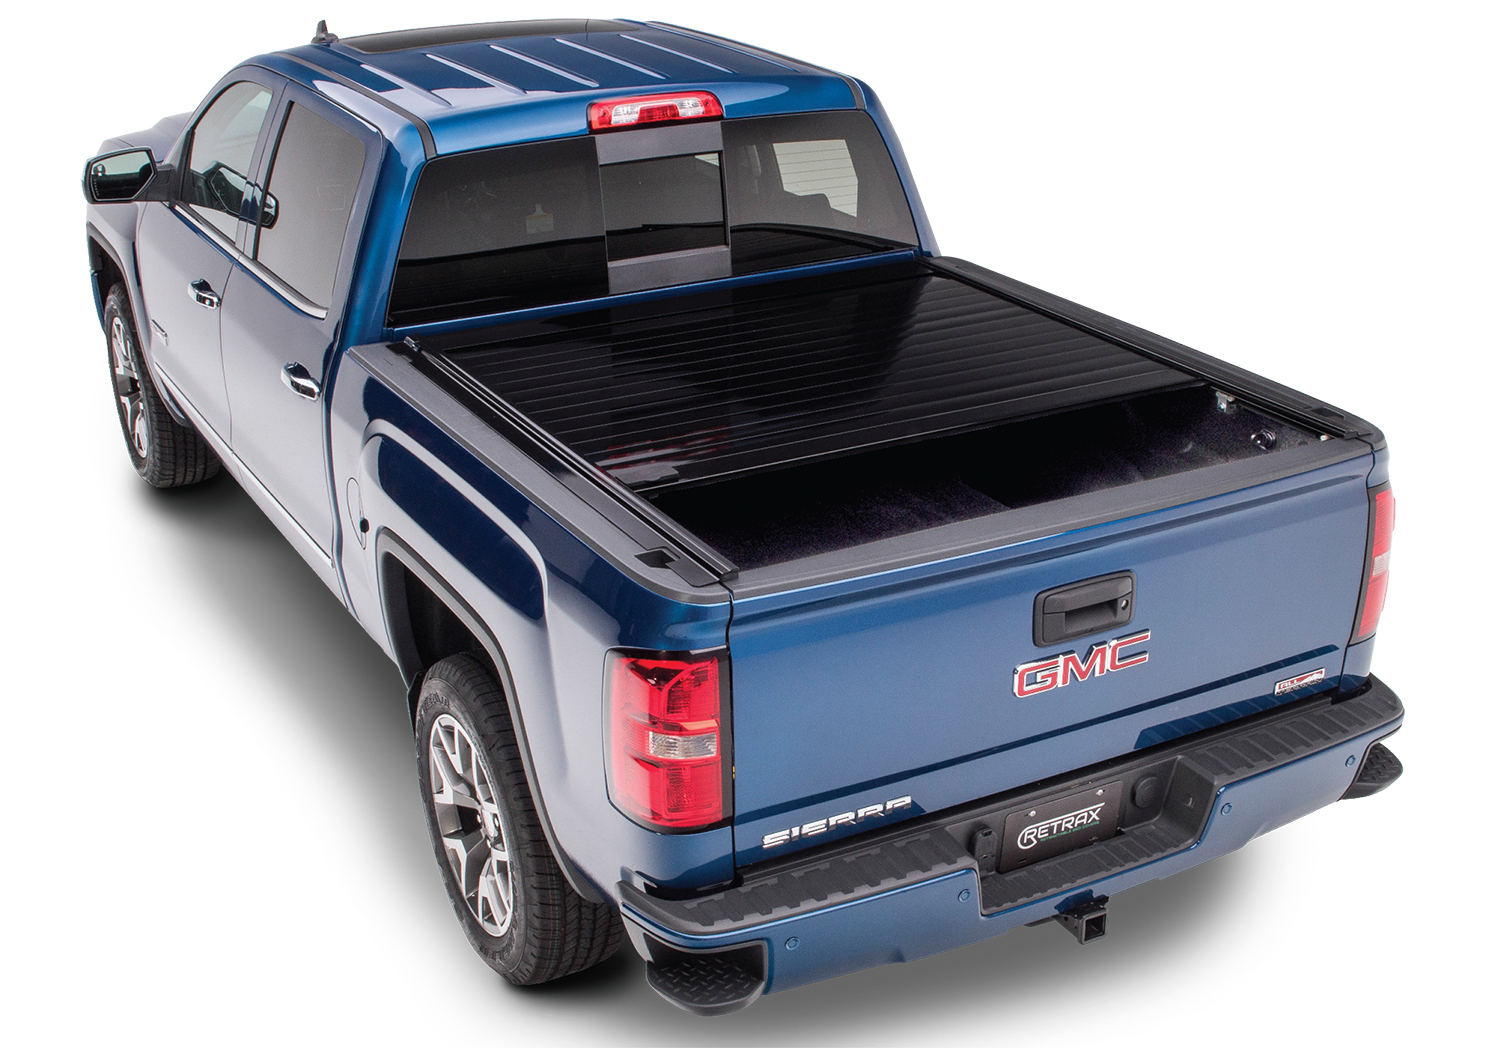 2018 Ford F150 Truck Bed Accessories Realtruck  Upcomingcarshq.com